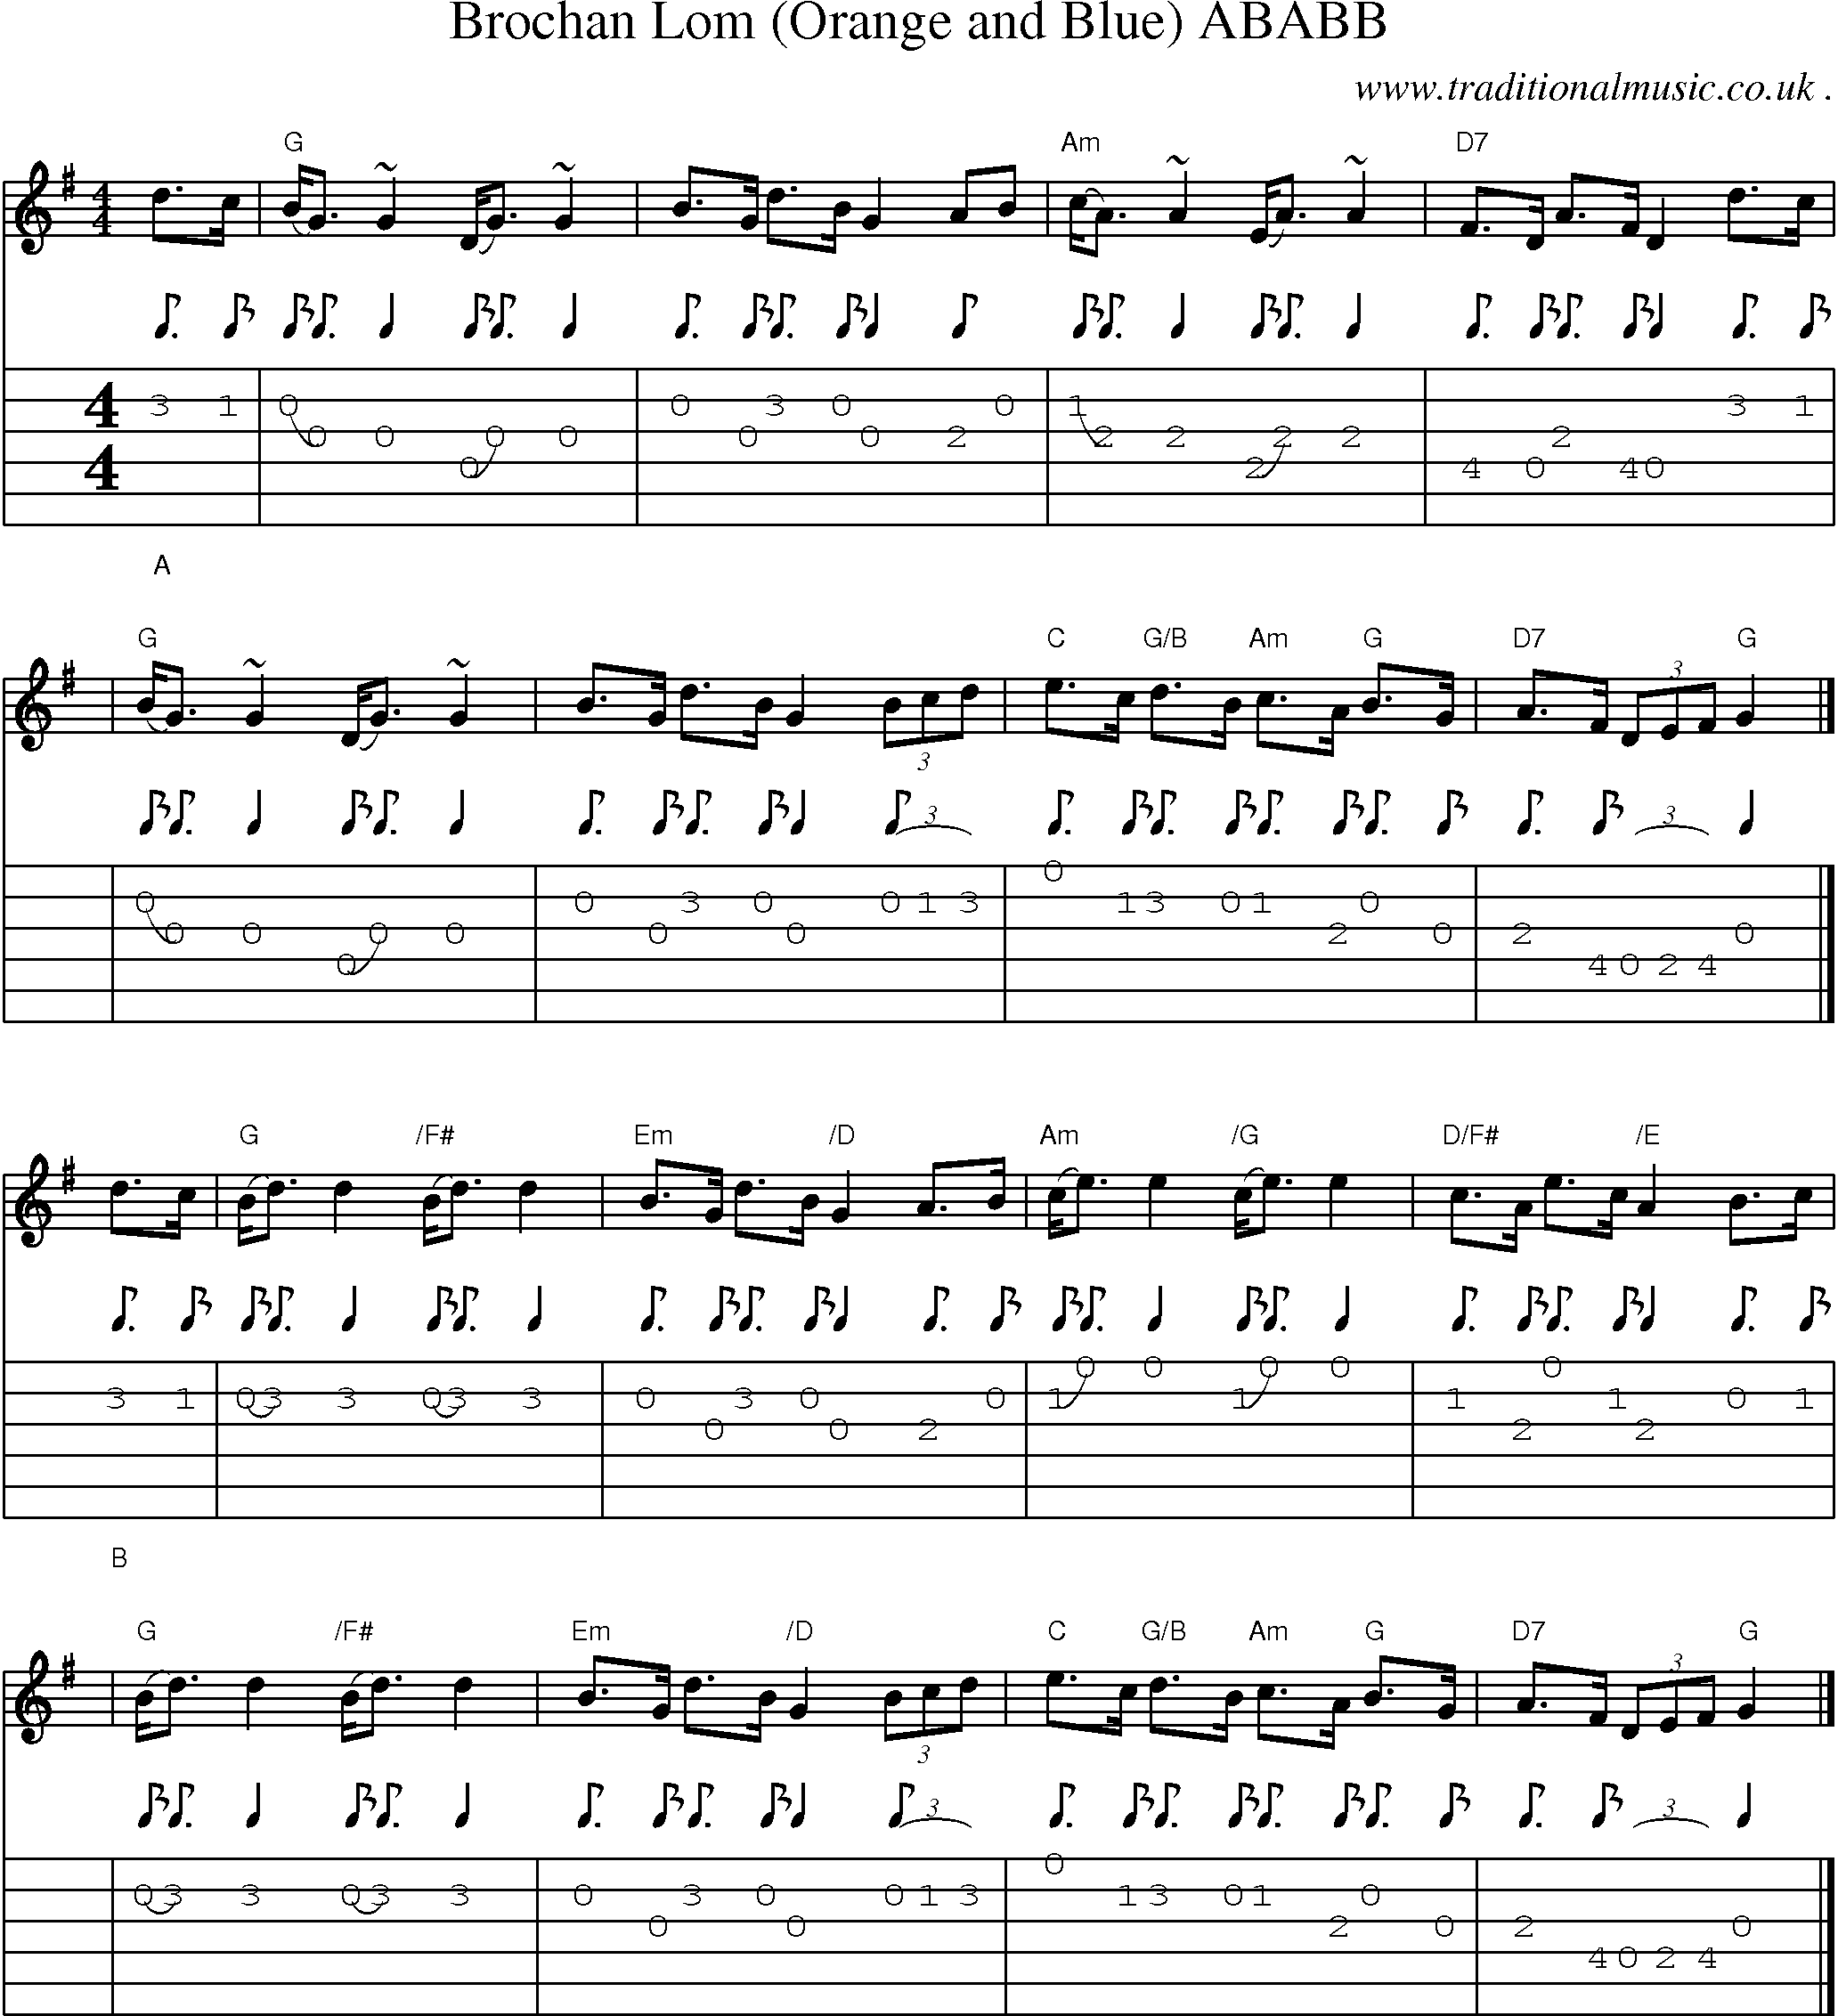 Sheet-music  score, Chords and Guitar Tabs for Brochan Lom Orange And Blue Ababb